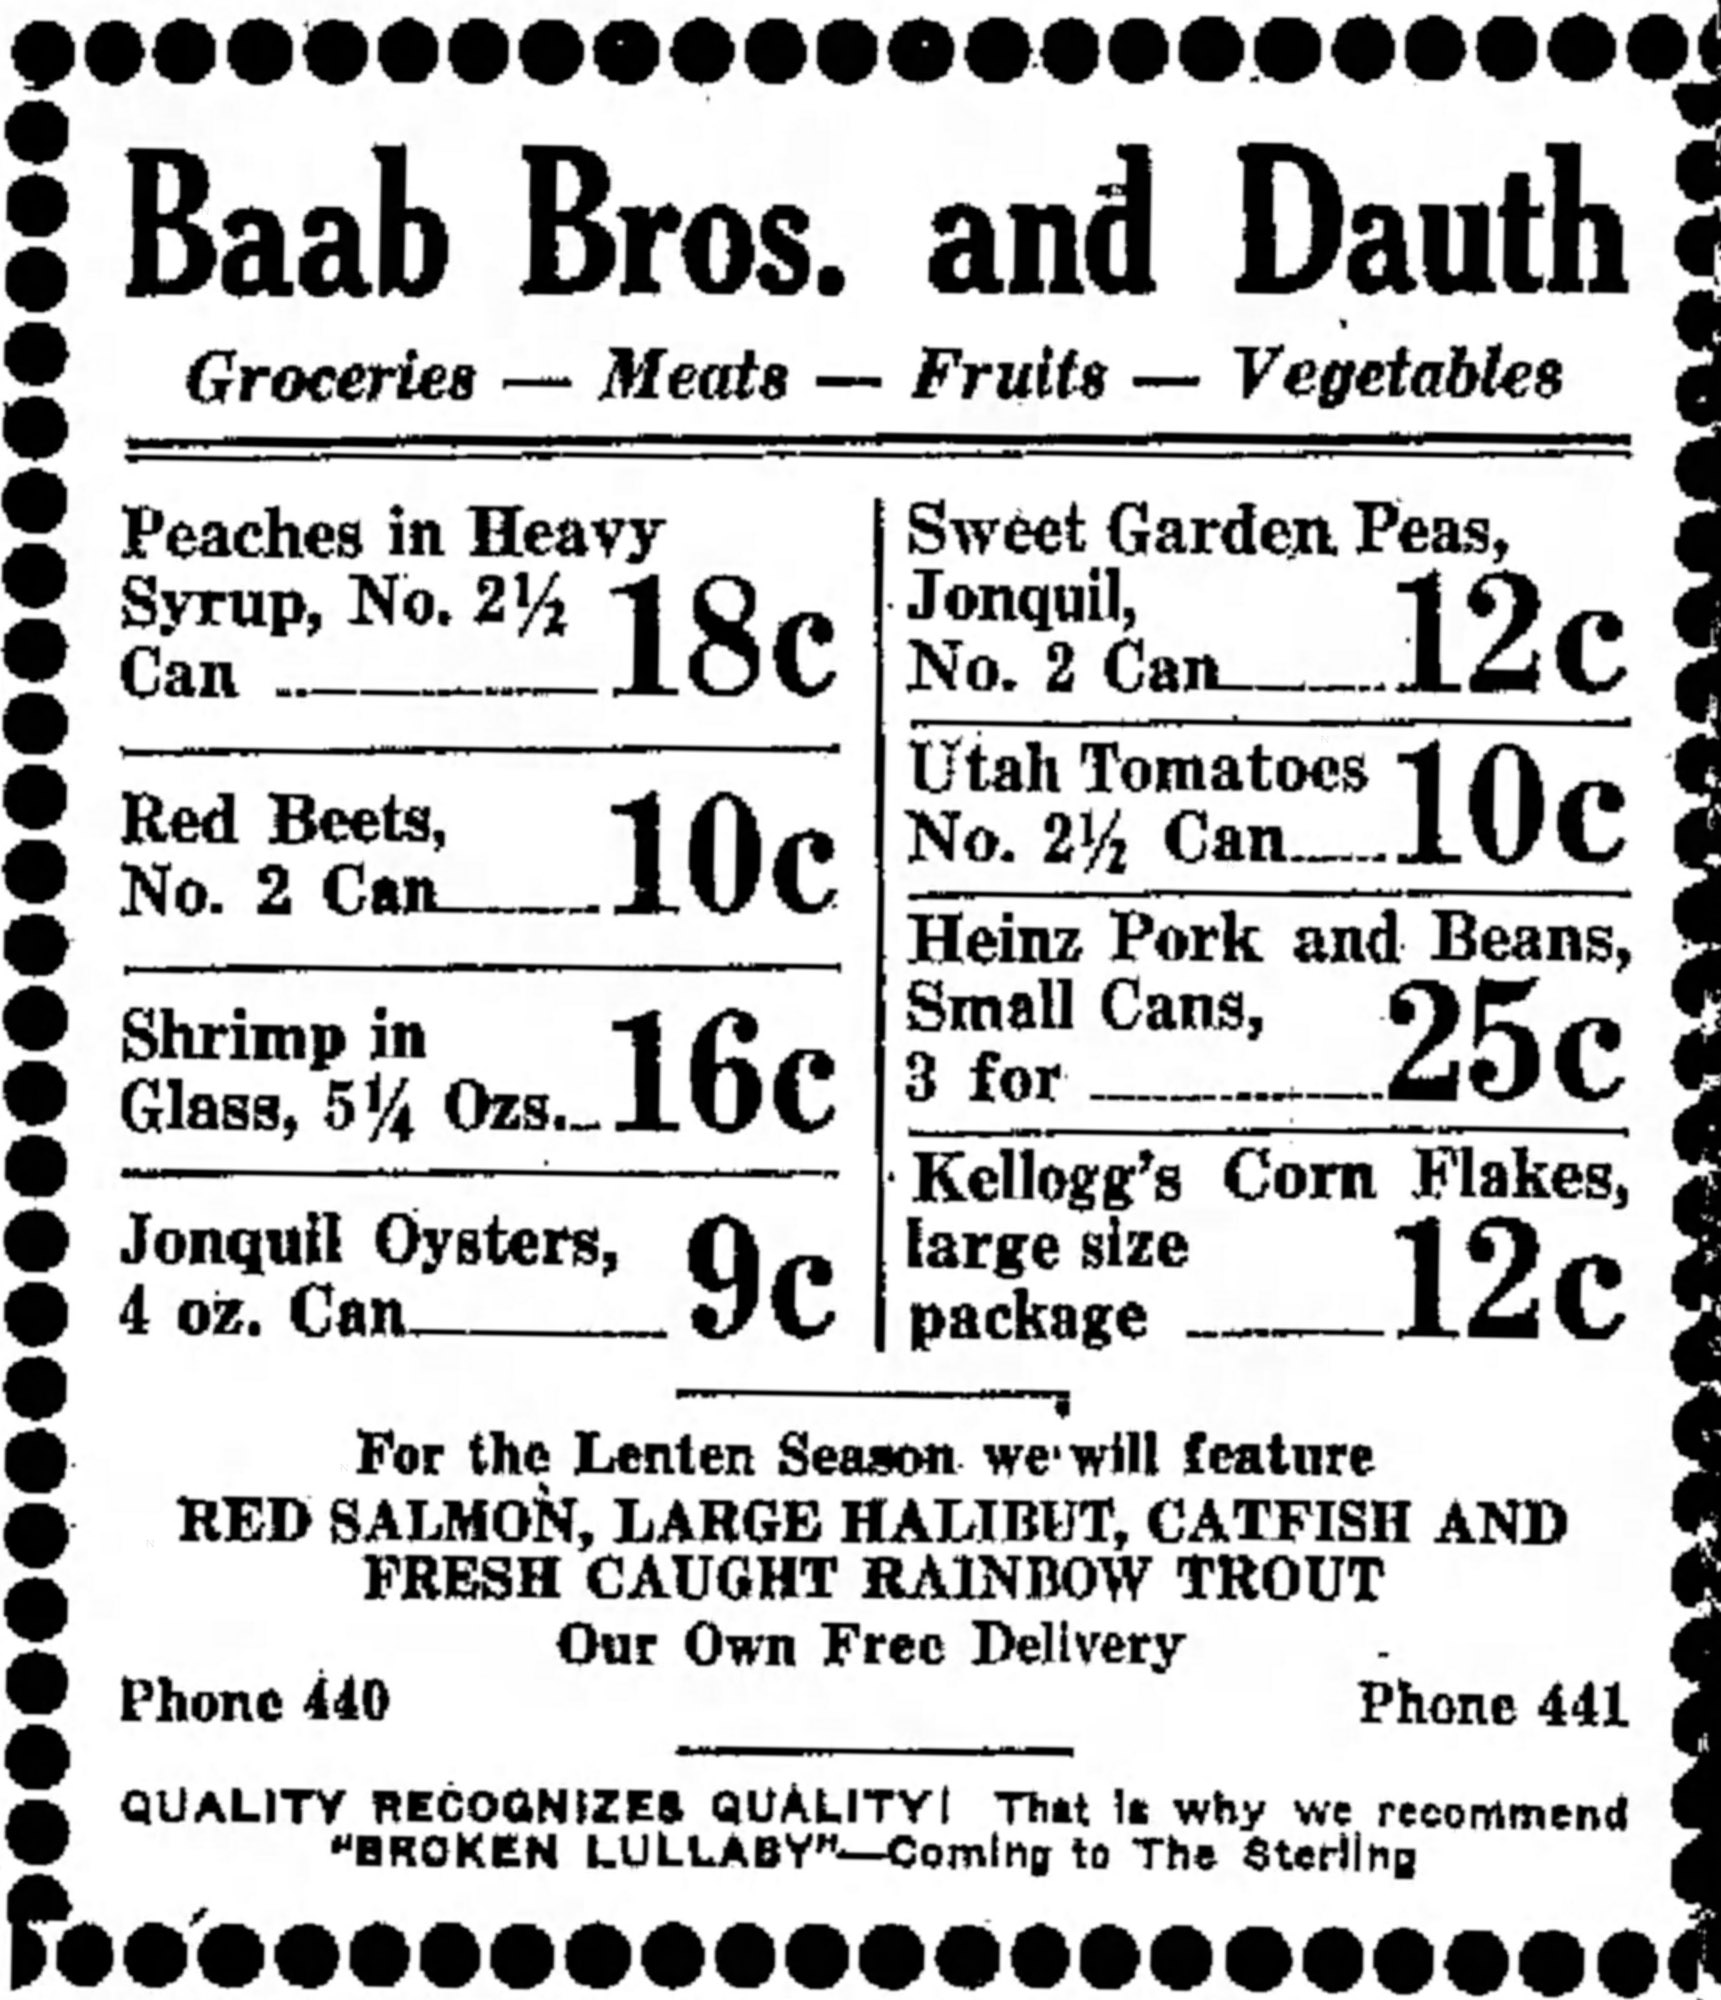 Dauth Family Archive - 1932-03-02 - Greeley Daily Tribune - Baab Bros and Dauth Advertisement